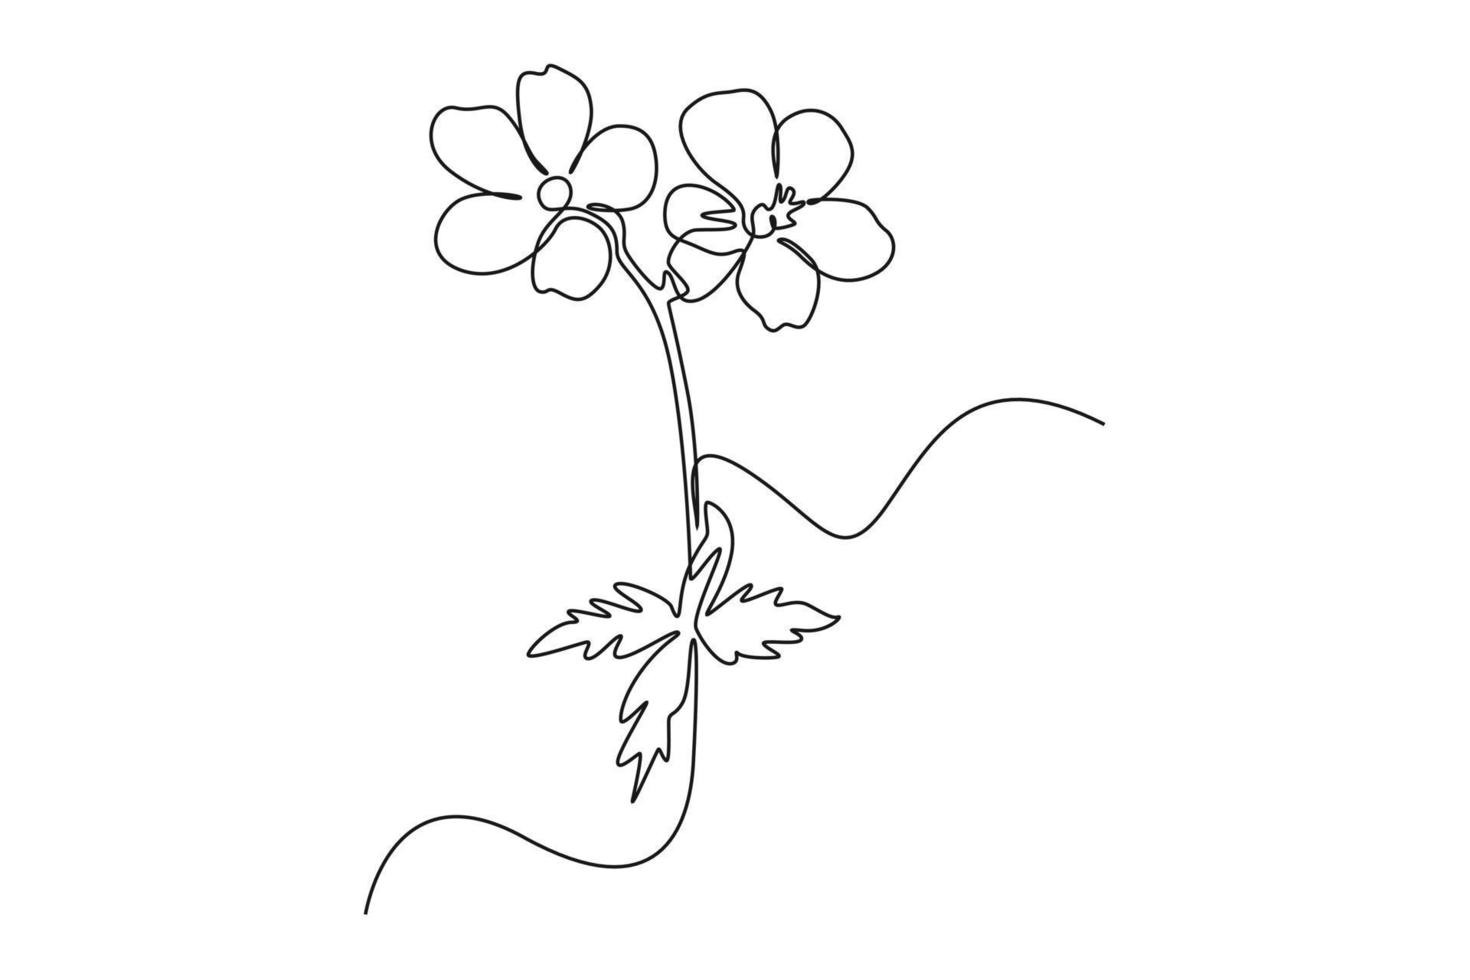 Single one line drawing geranium flower. Beautiful flower concept. Continuous line draw design graphic vector illustration.